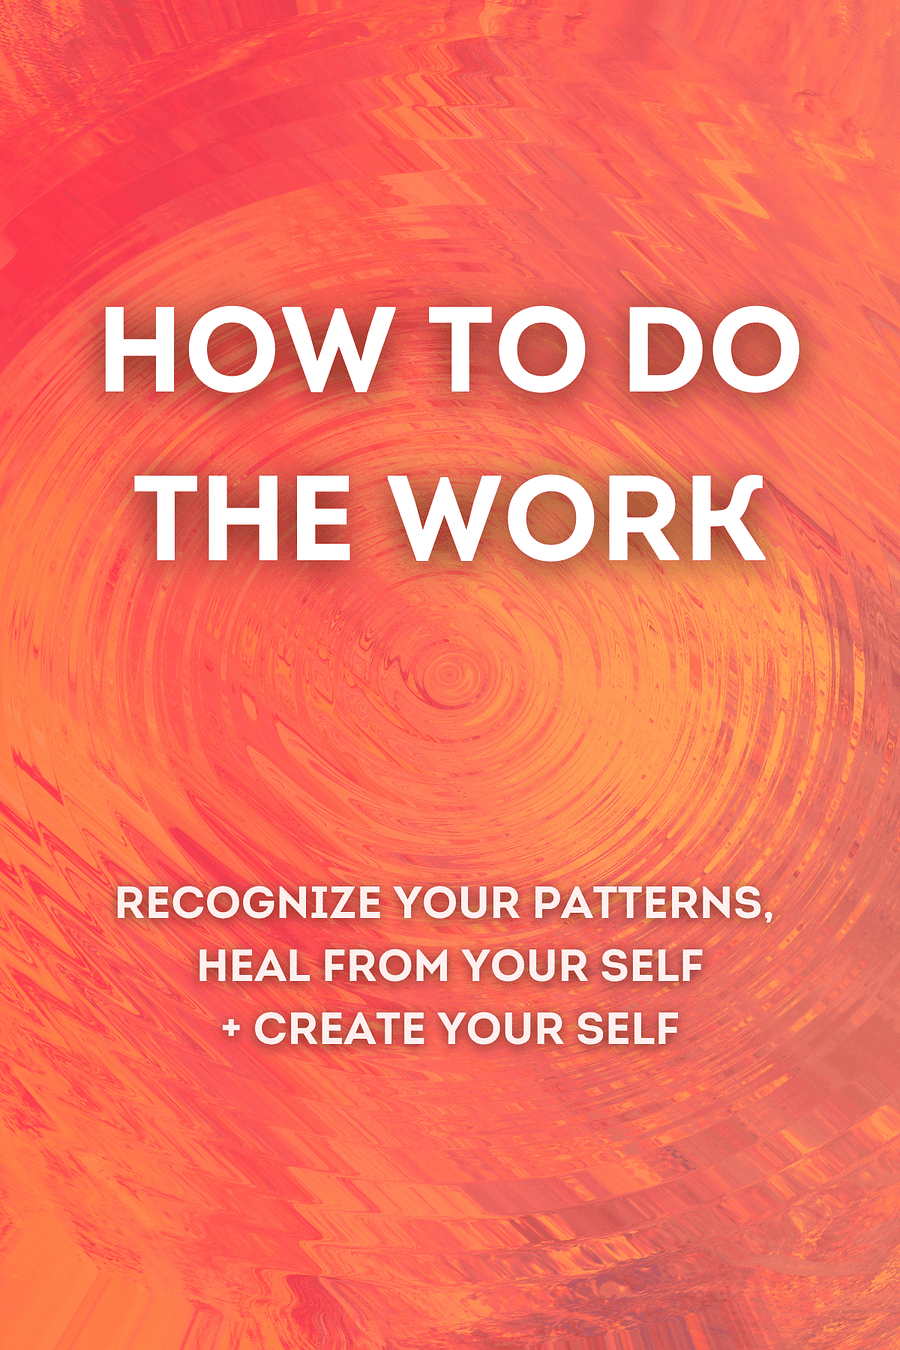 How to Do the Work by Dr. Nicole LePera - Book Summary